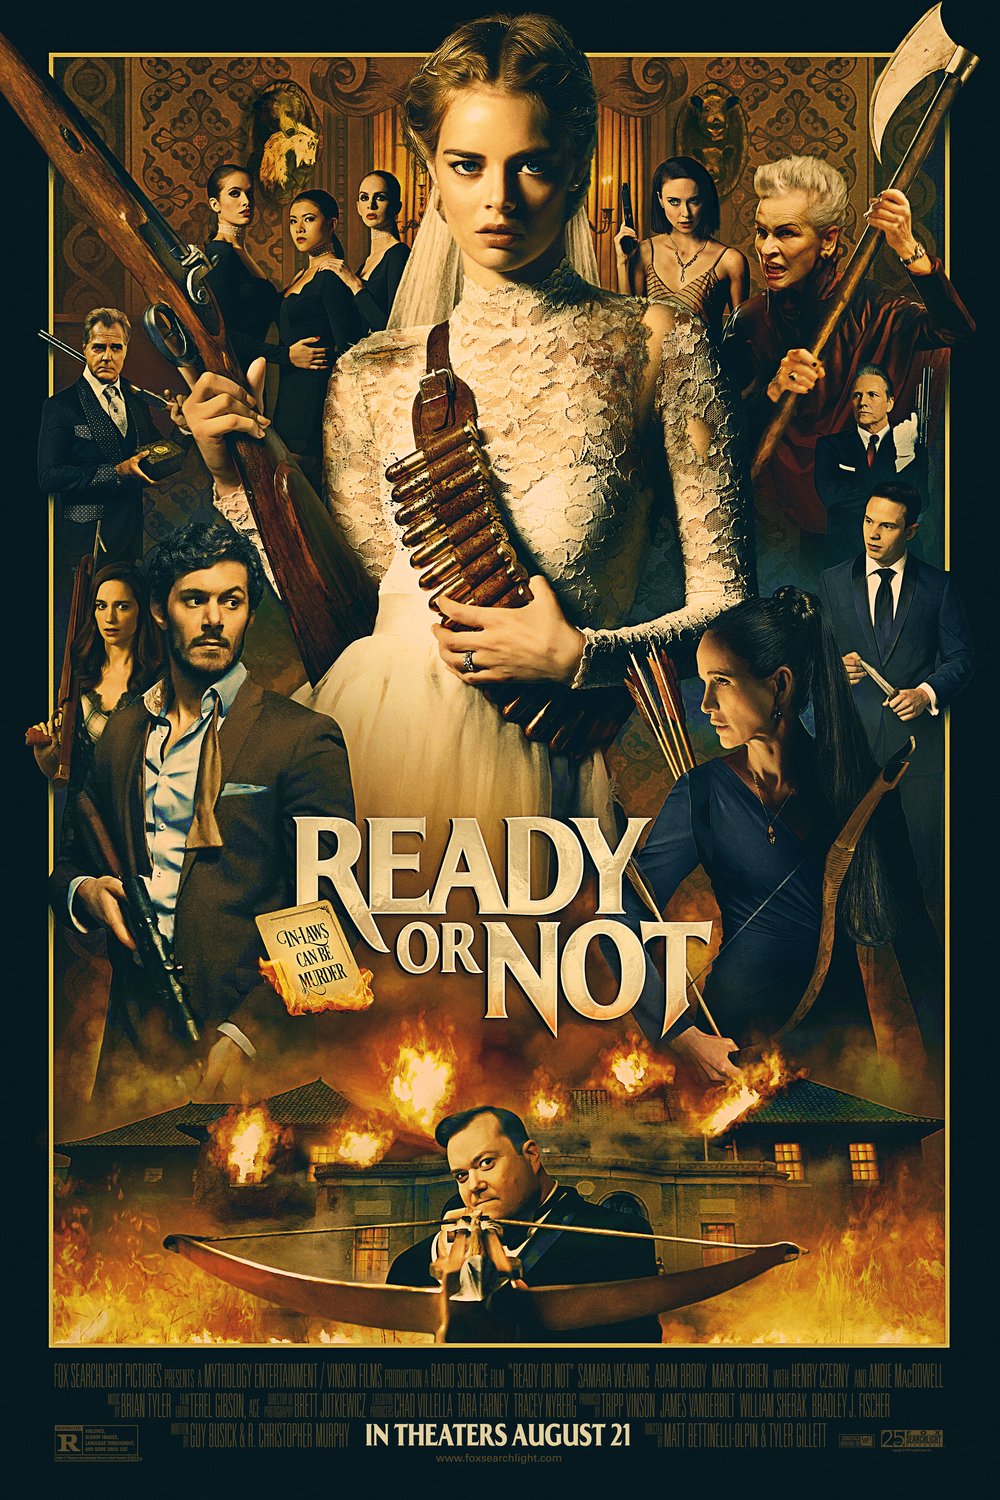 Poster of the movie Ready or Not